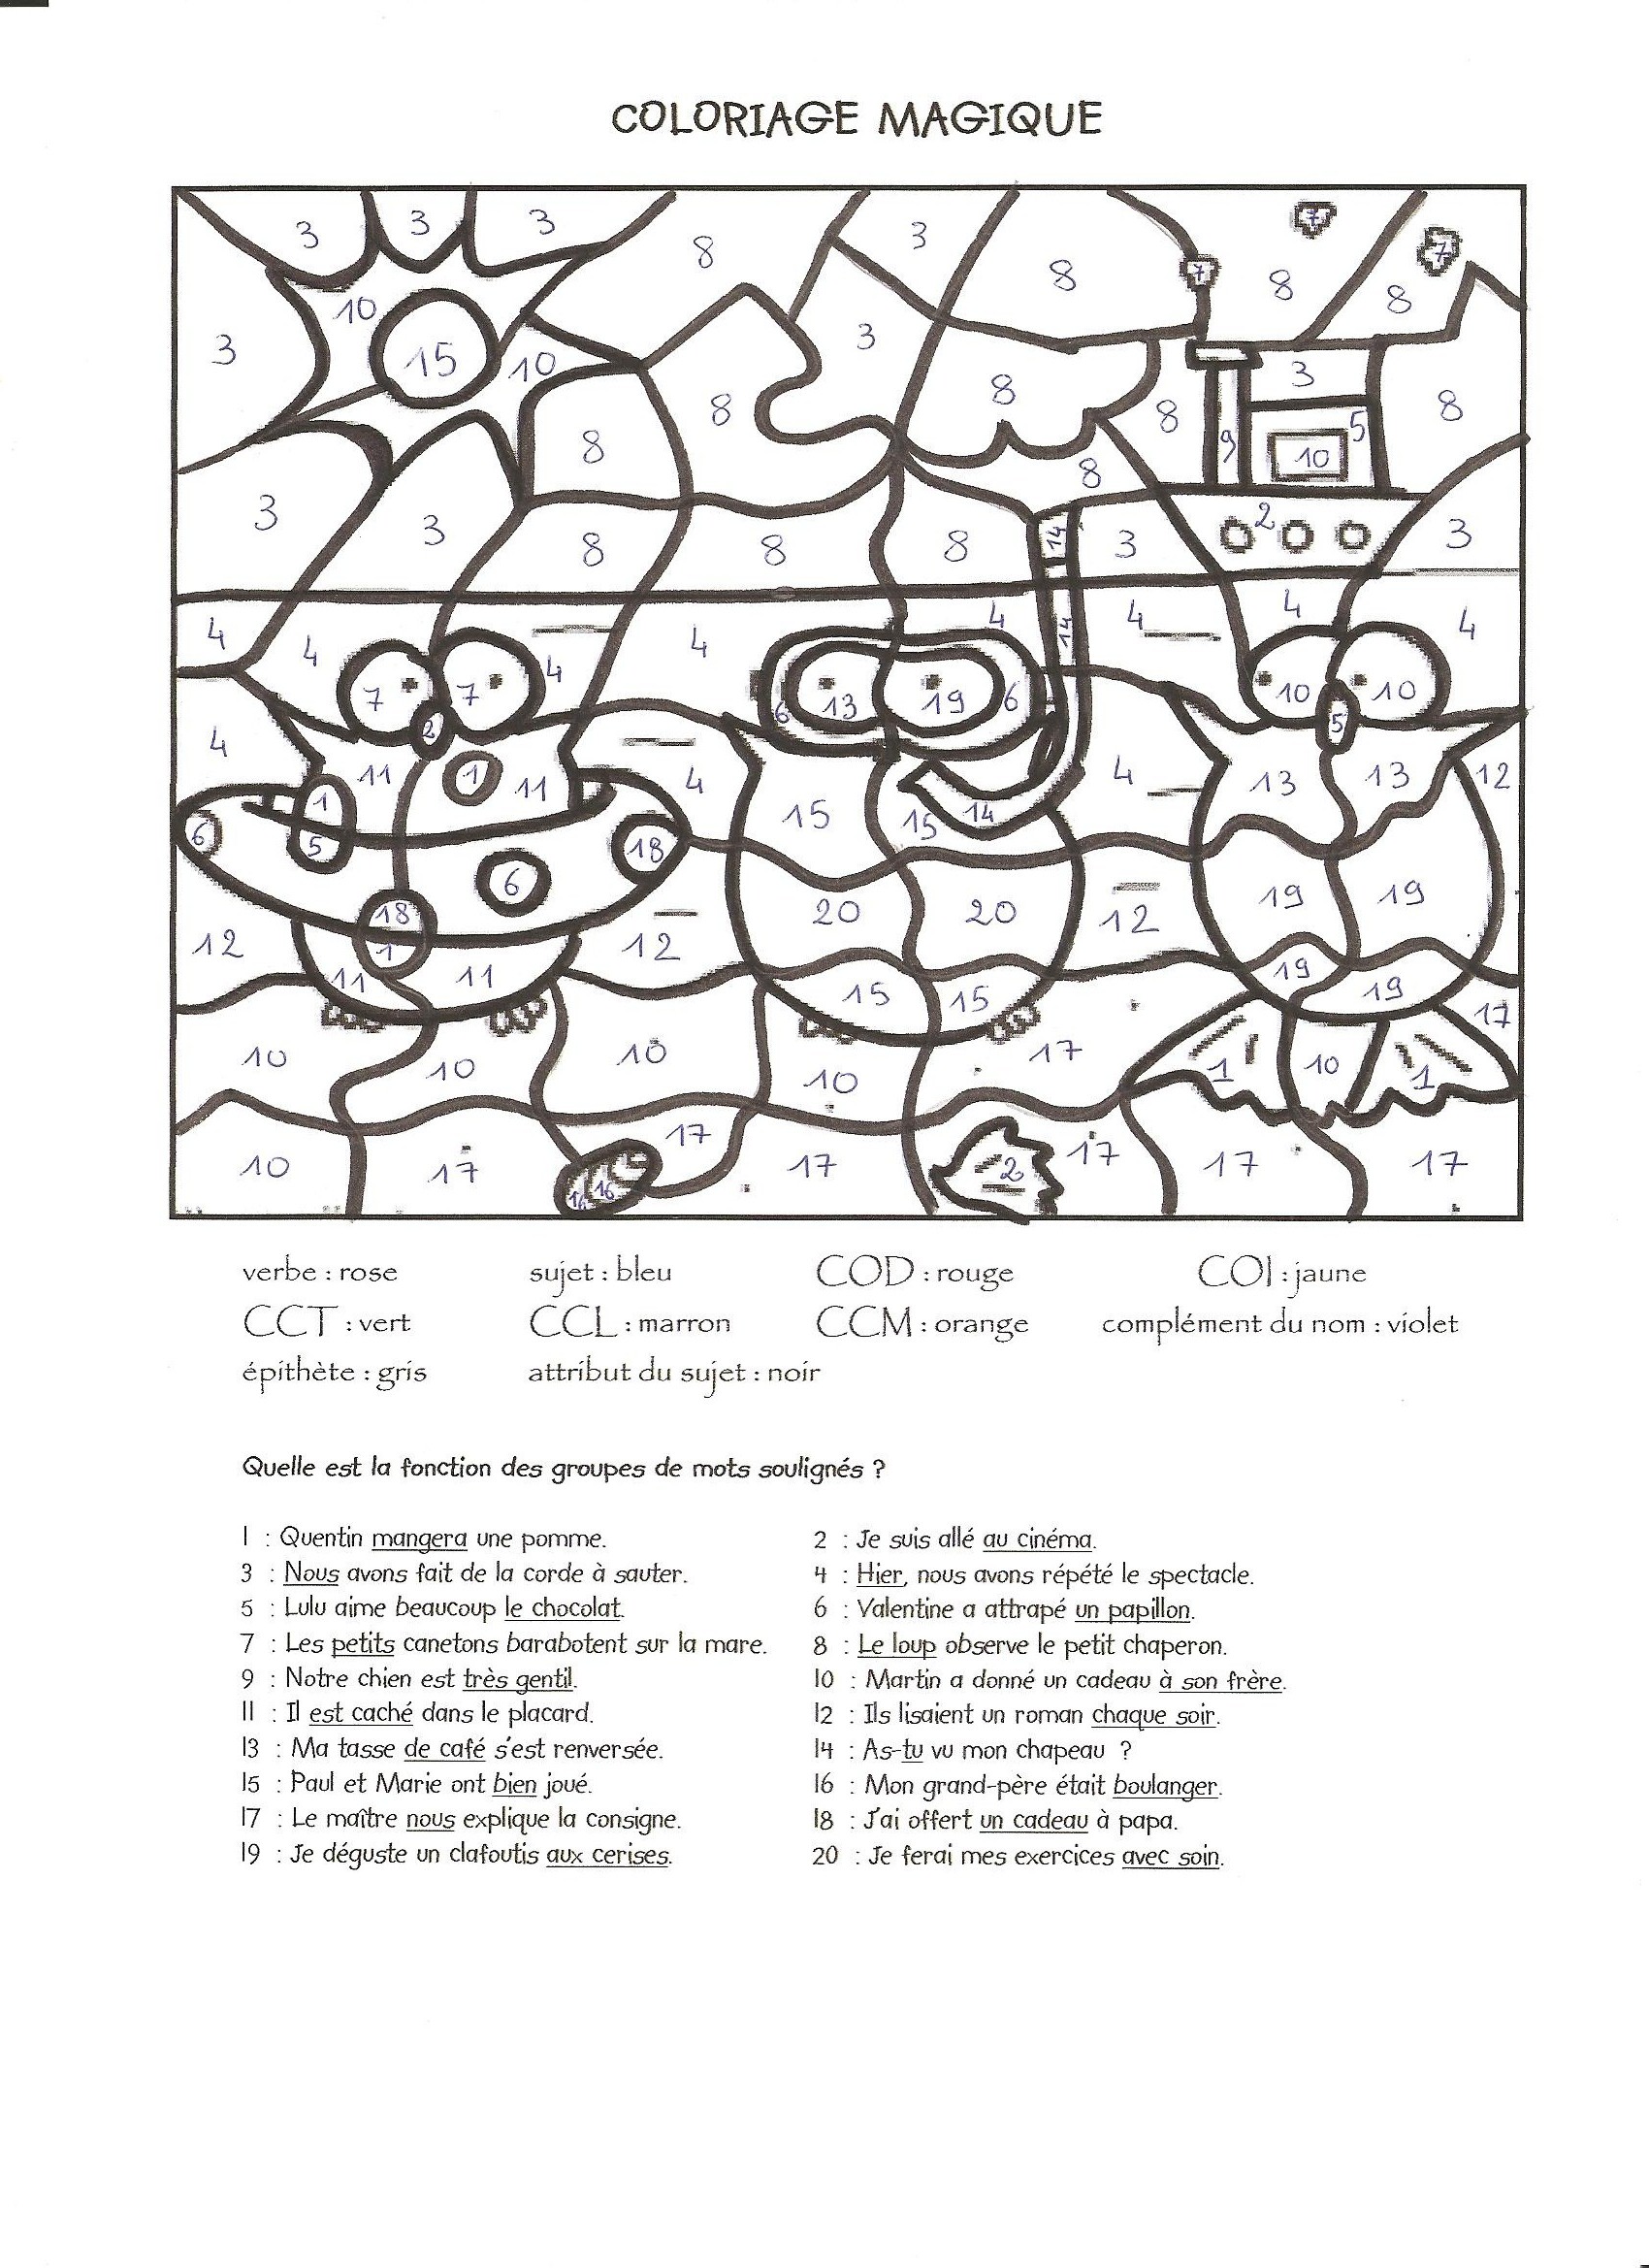 Magic Coloring coloring page to download : French lesson